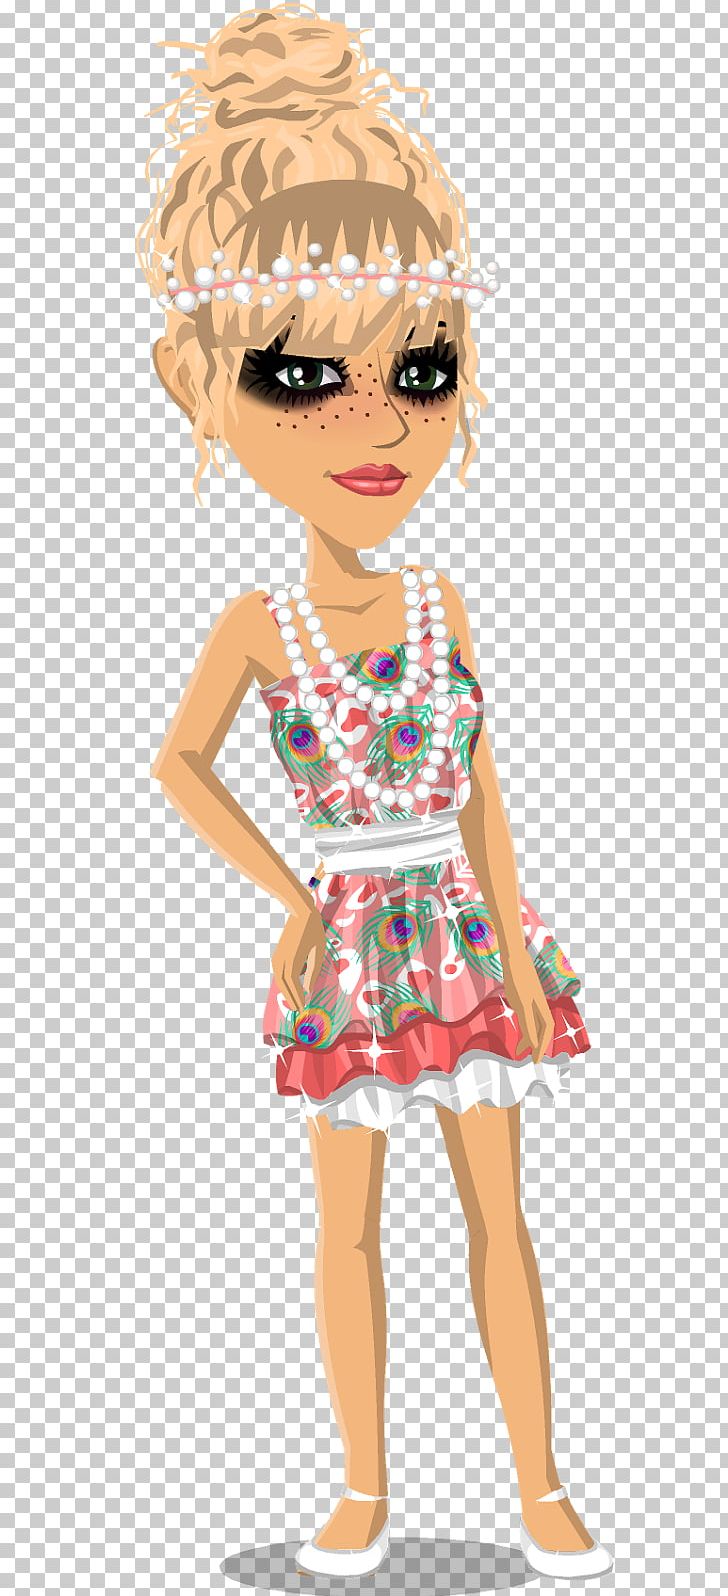 MovieStarPlanet Character PNG, Clipart, Art, Barbie, Blond, Brown Hair, Cartoon Free PNG Download